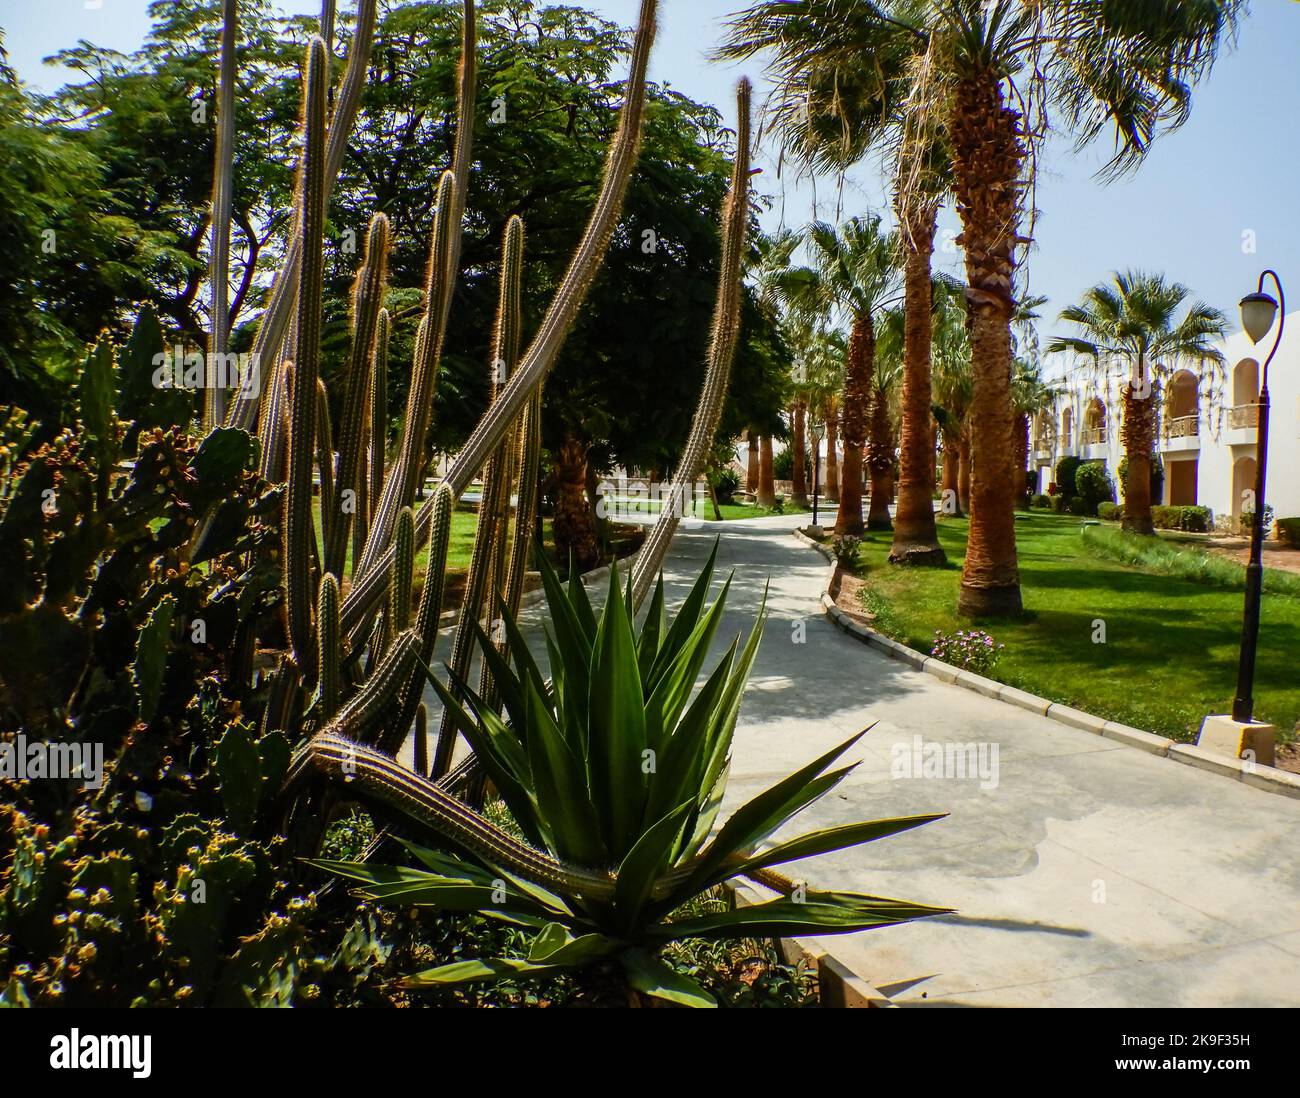 diferent cactus and plants on the path in egypt on vacation Stock Photo